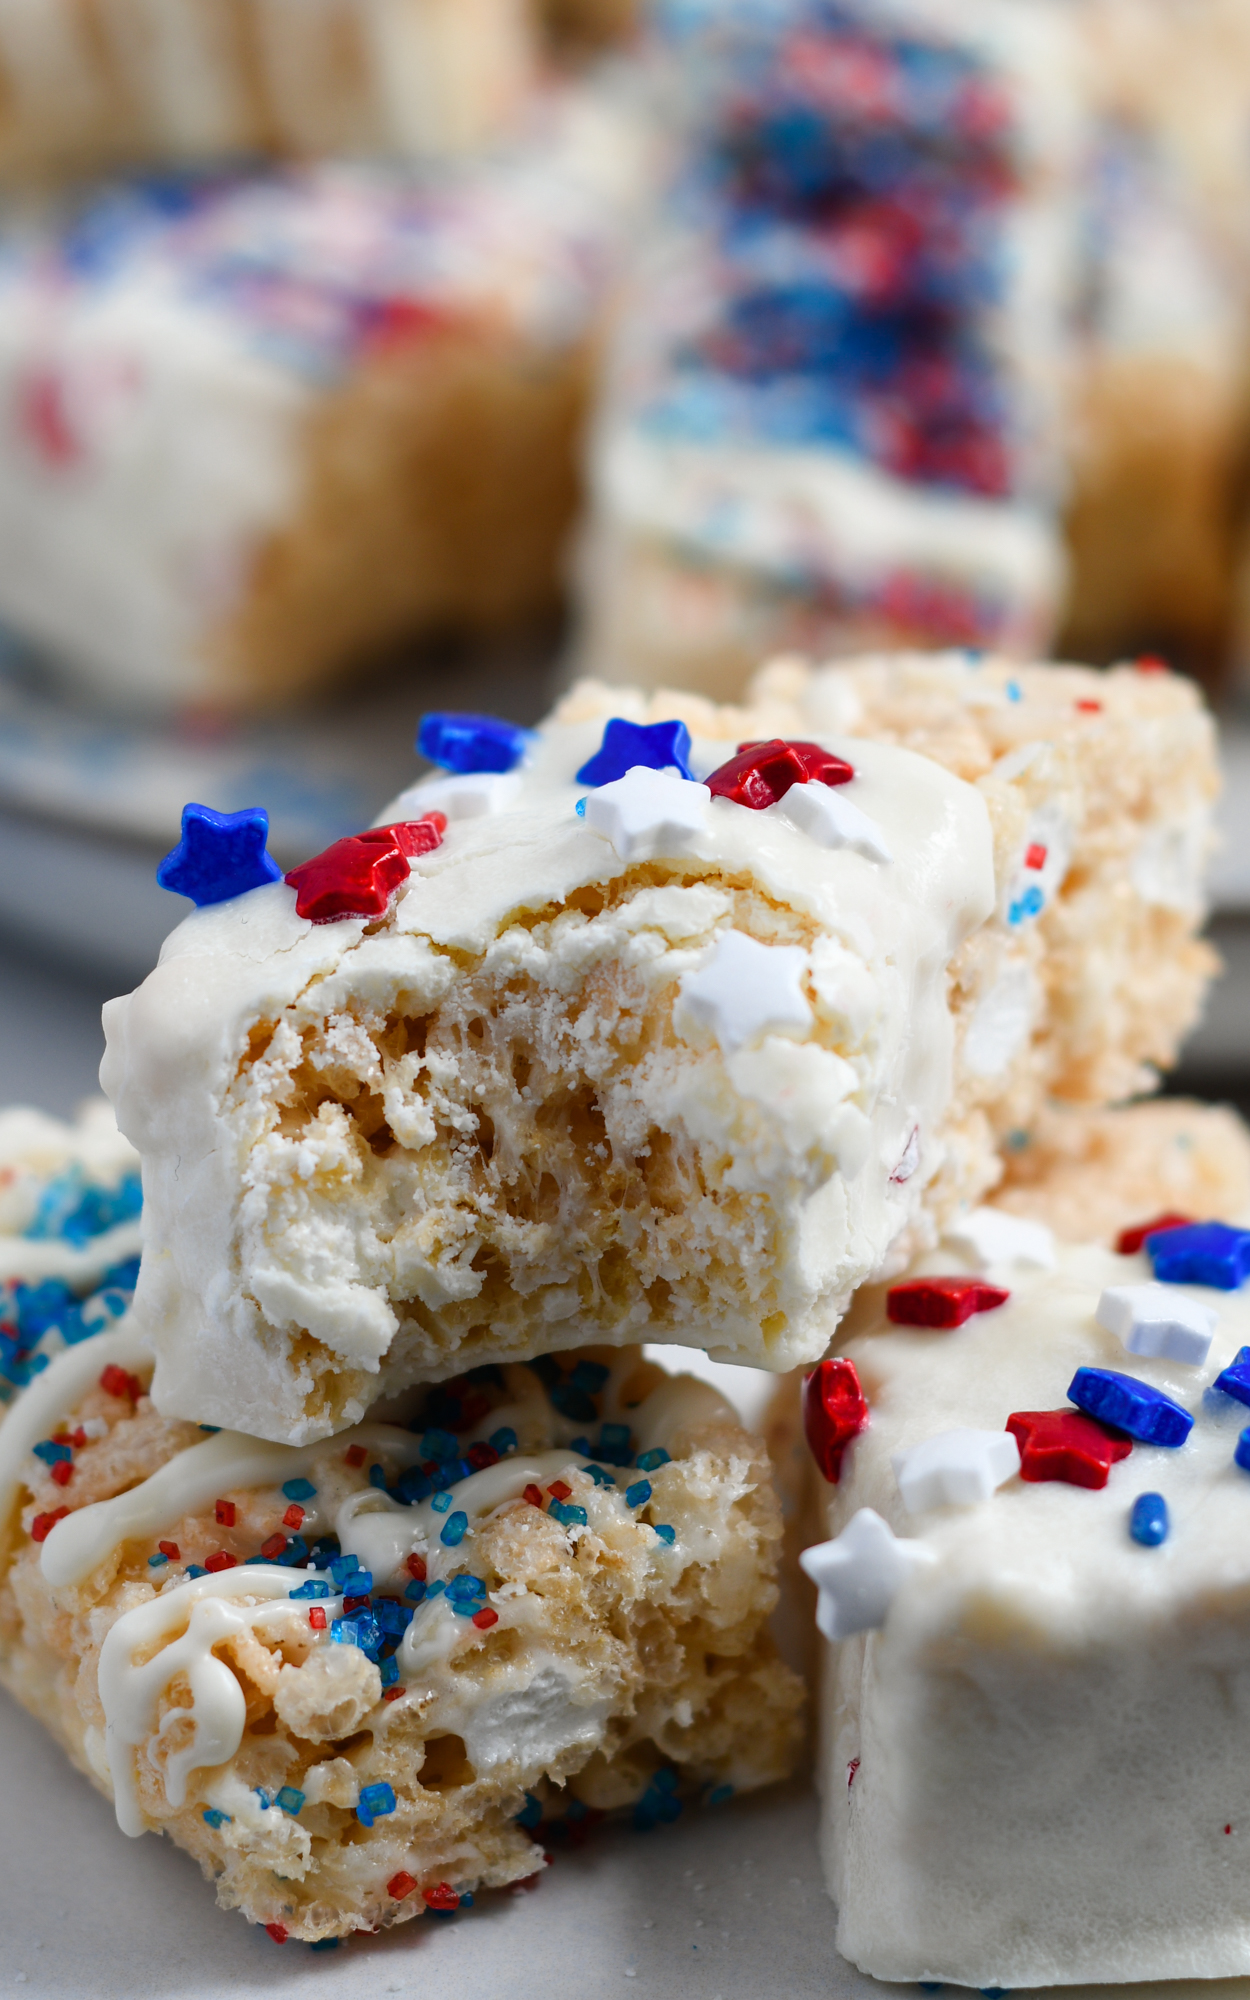 Rice Krispie Treats dipped in white chocolate with red white and blue and stars sprinkles. One has bite from it.